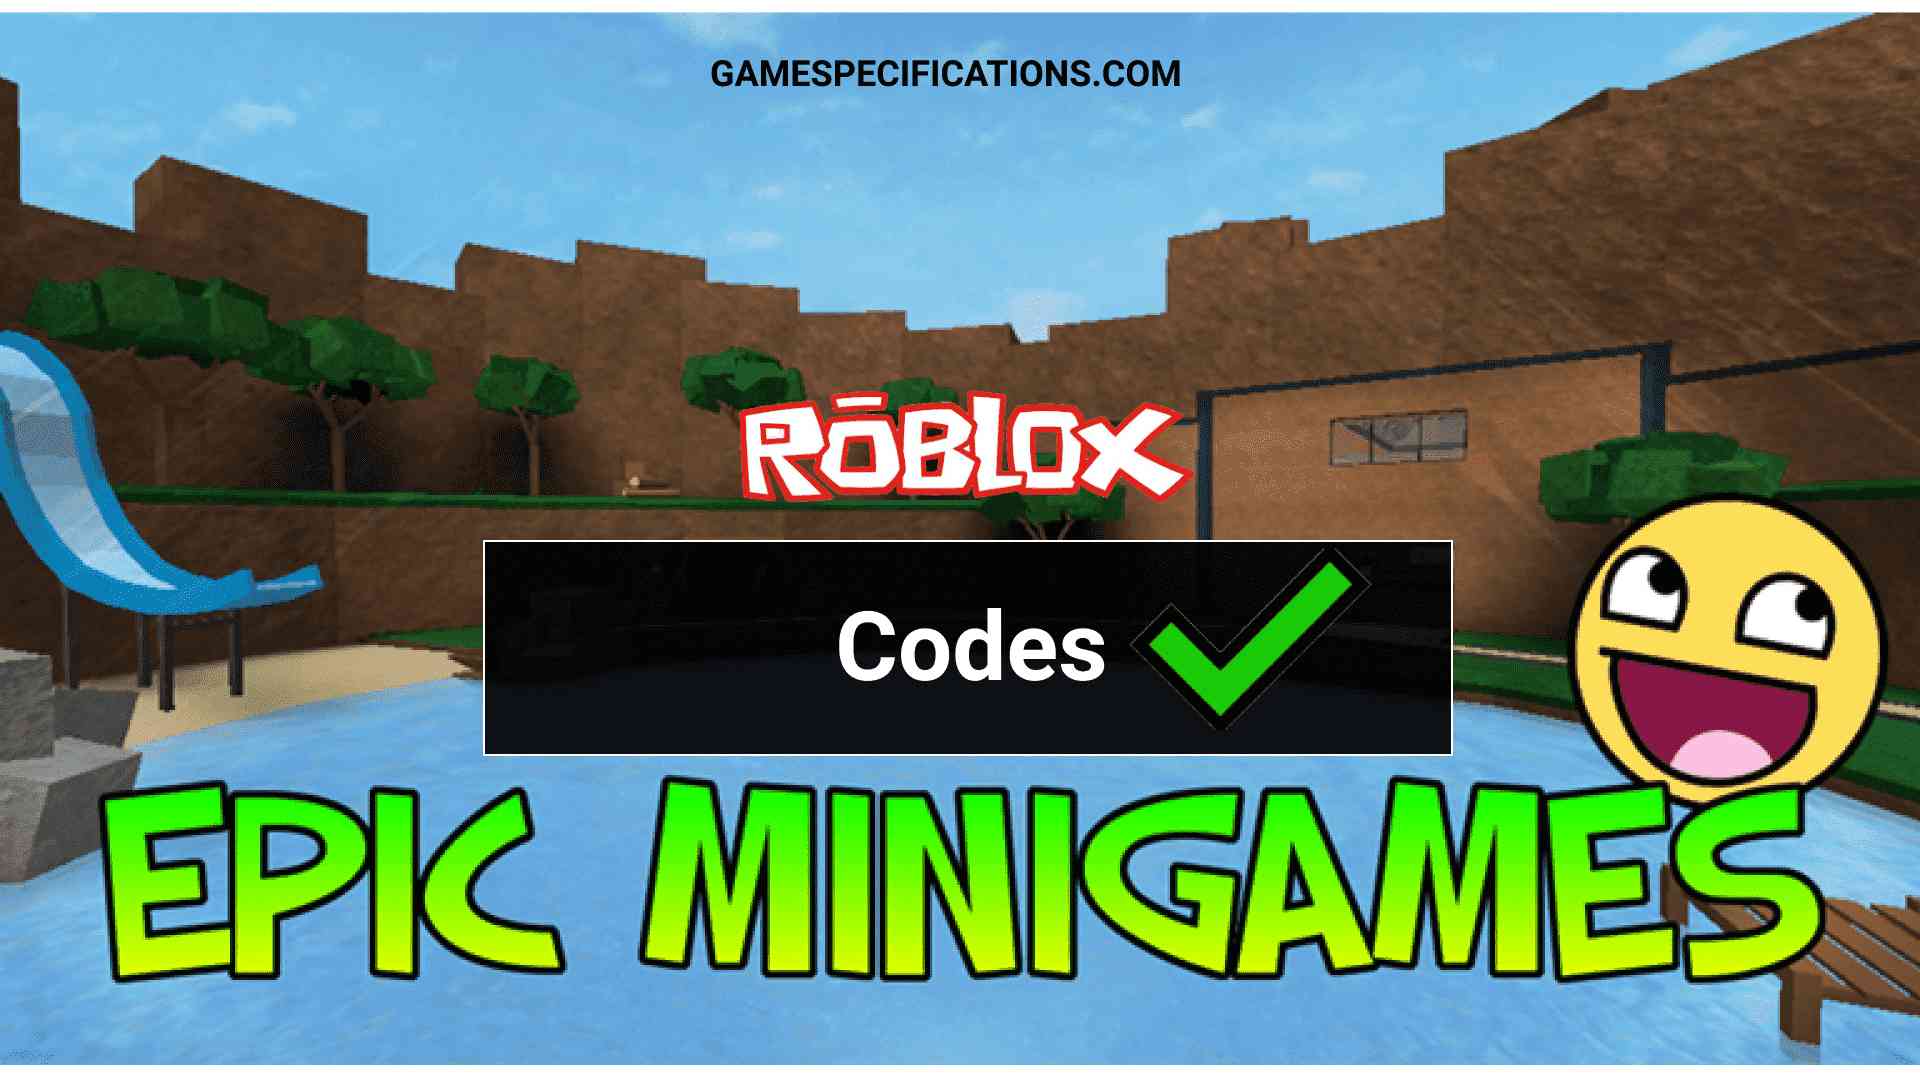 Roblox Epic Minigames Codes To Get Free Items July 2021 Game Specifications - codes for games on roblox